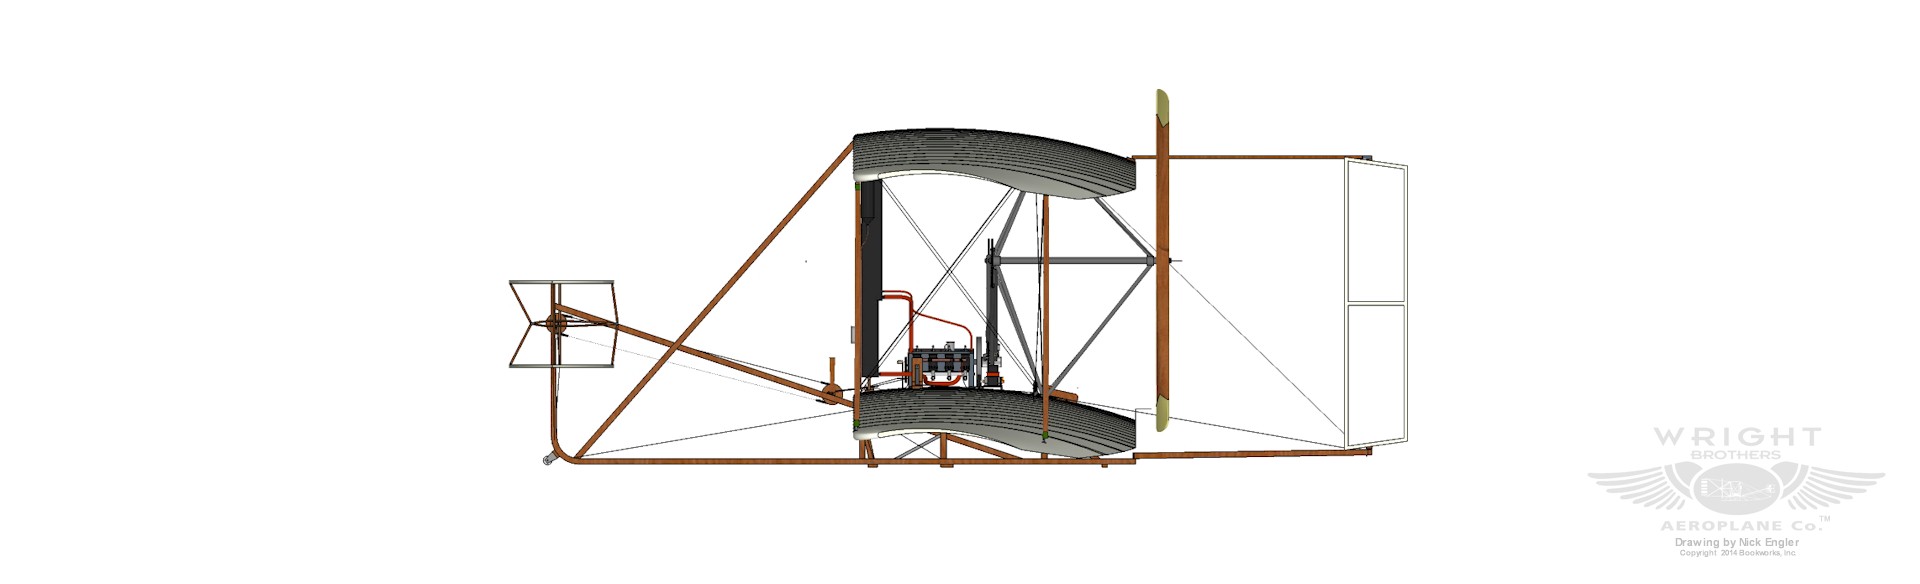 wright flyer clipart - photo #41